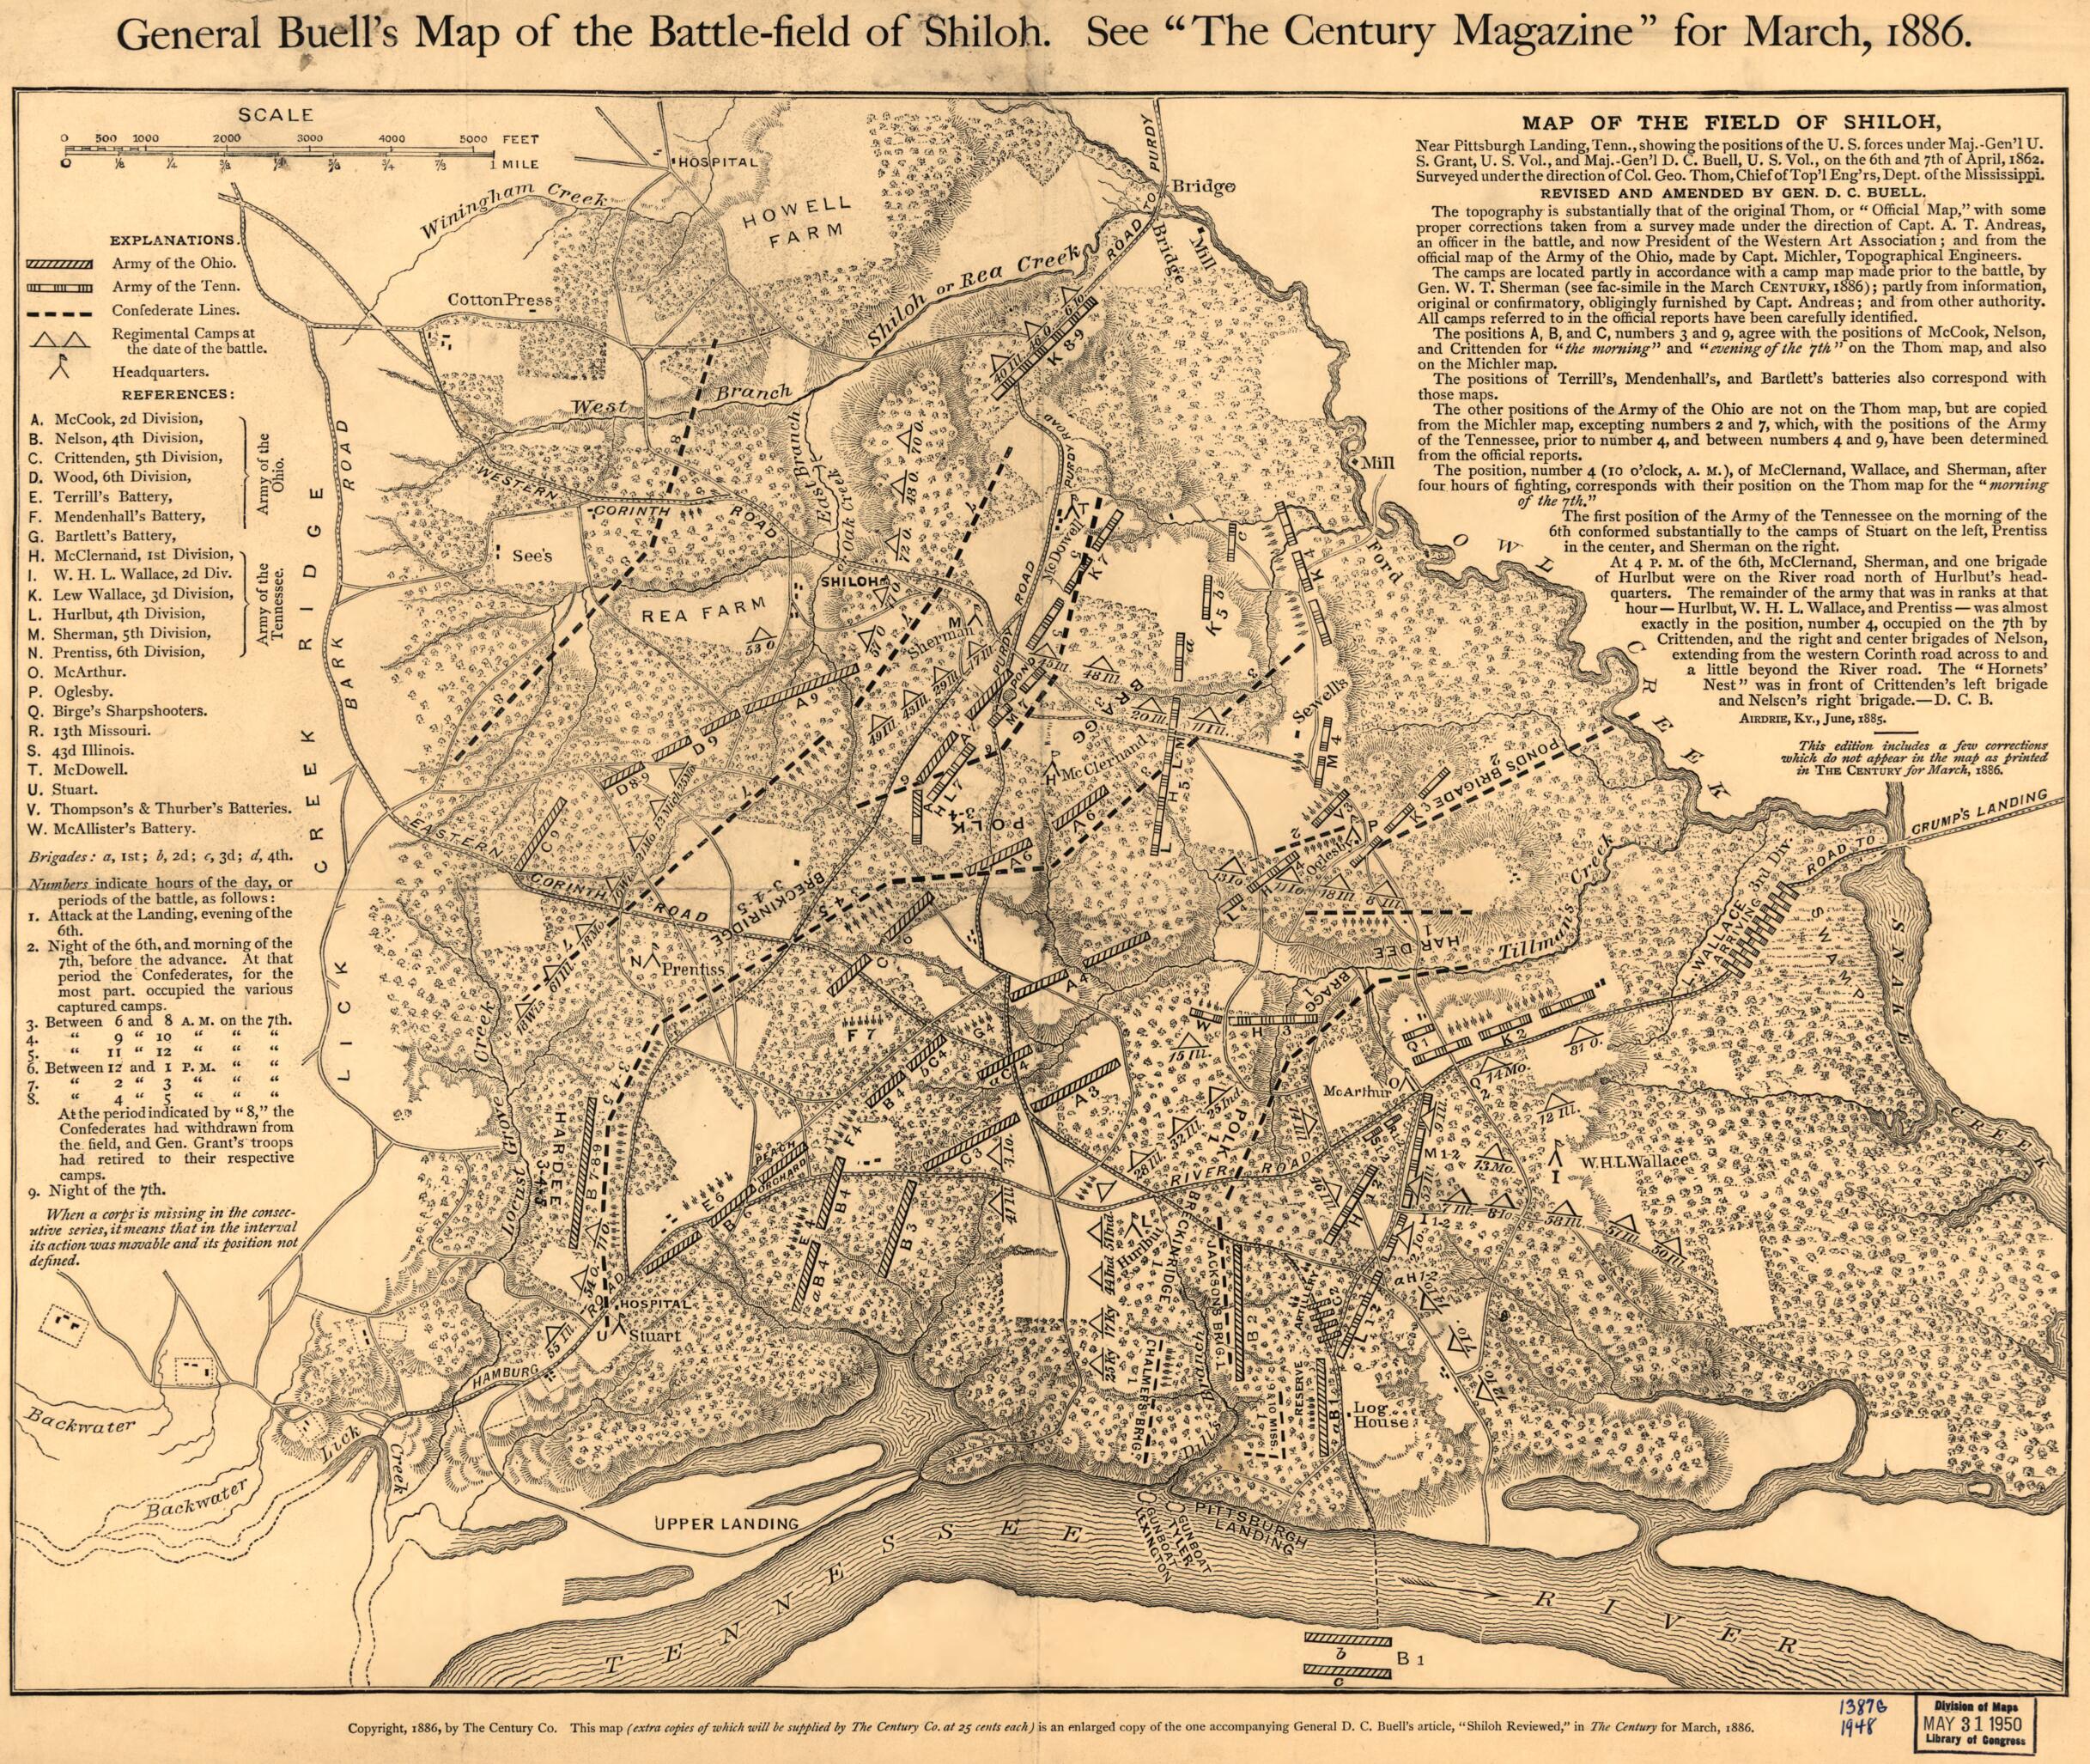 This old map of Field of Shiloh. April 6-7, 1862 from 1886 was created by Don Carlos Buell in 1886